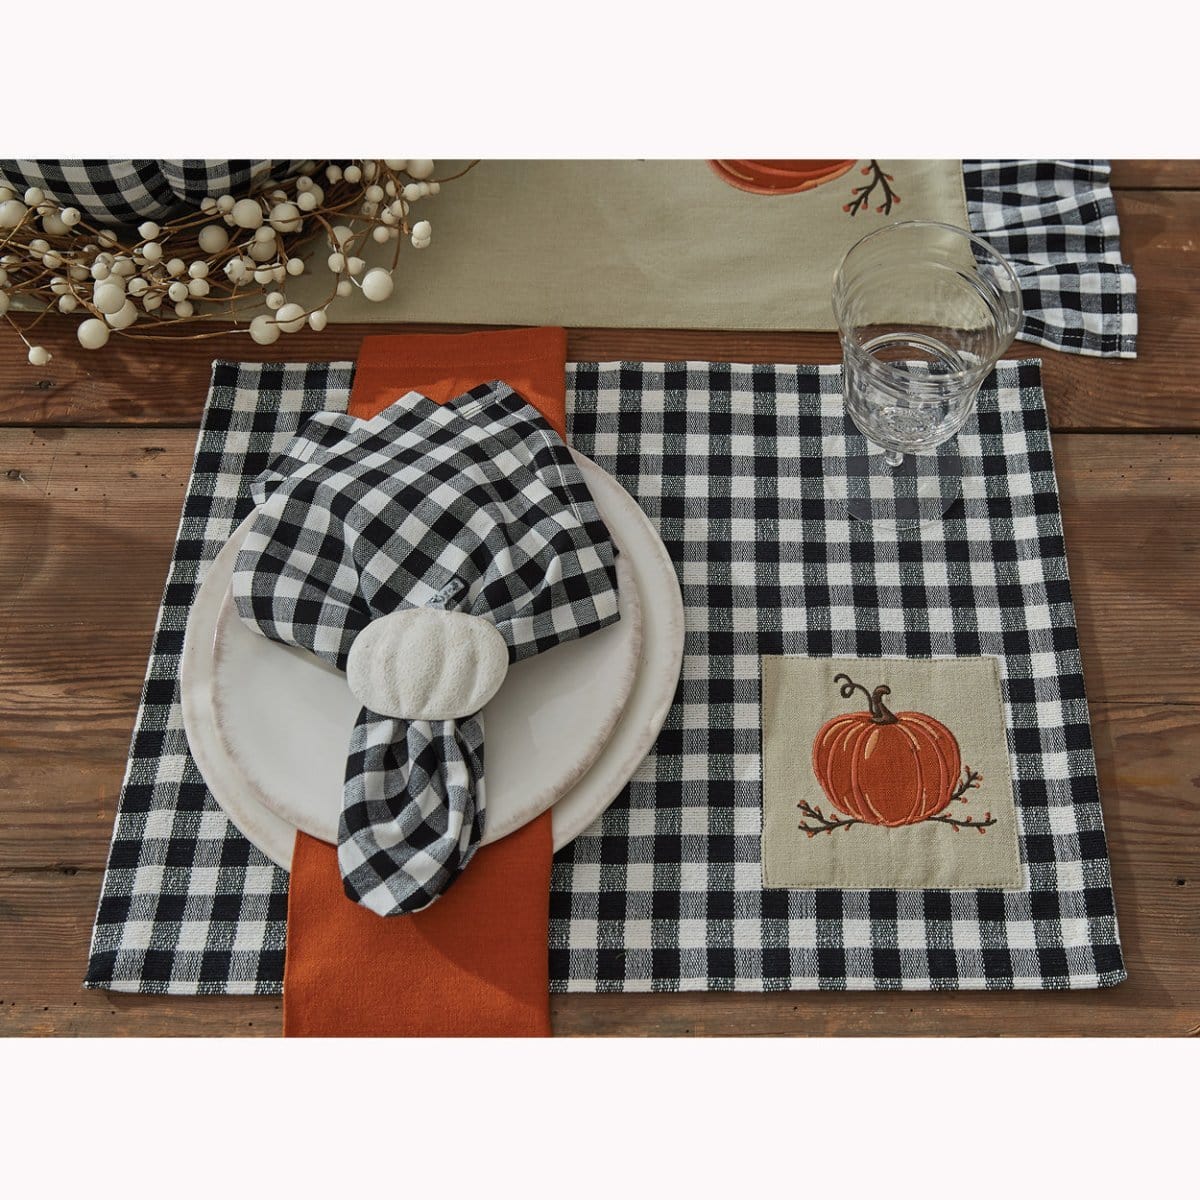 Autumn Checkerboard Appliqued & Embroidered Placemat-Park Designs-The Village Merchant